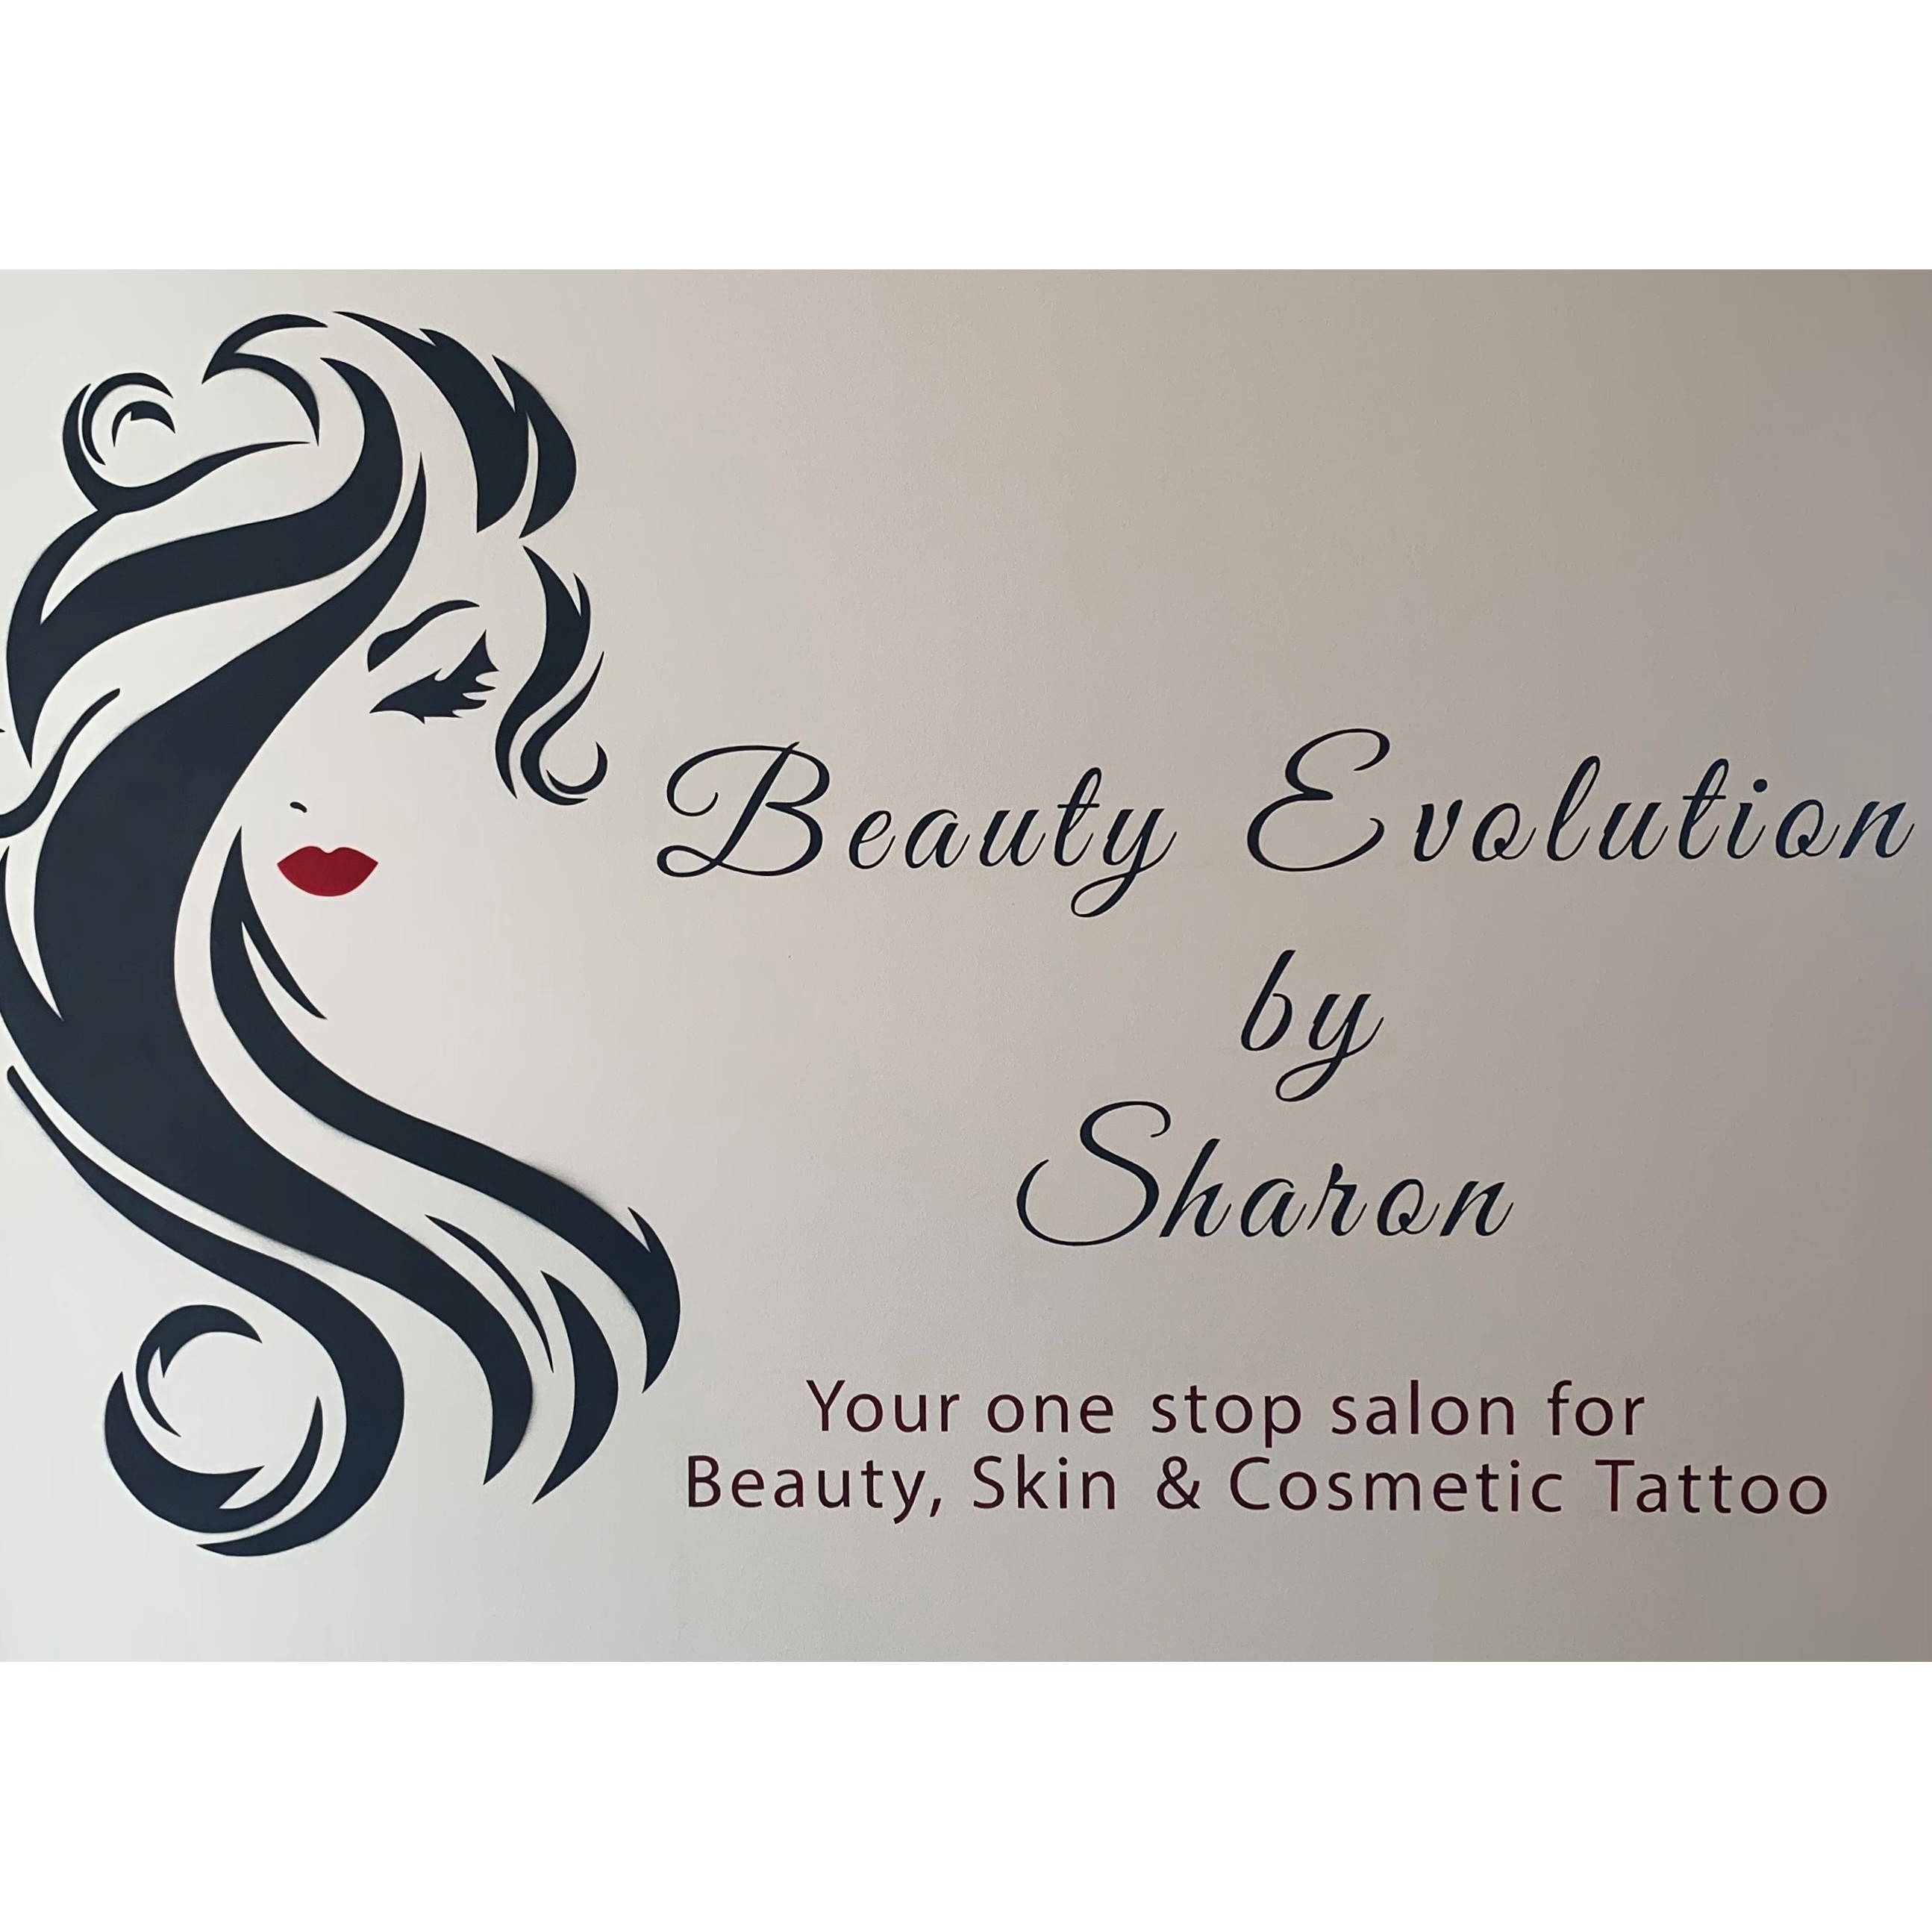 Beauty Evolution by Sharon - Mawson, ACT 2607 - 0419 285 294 | ShowMeLocal.com